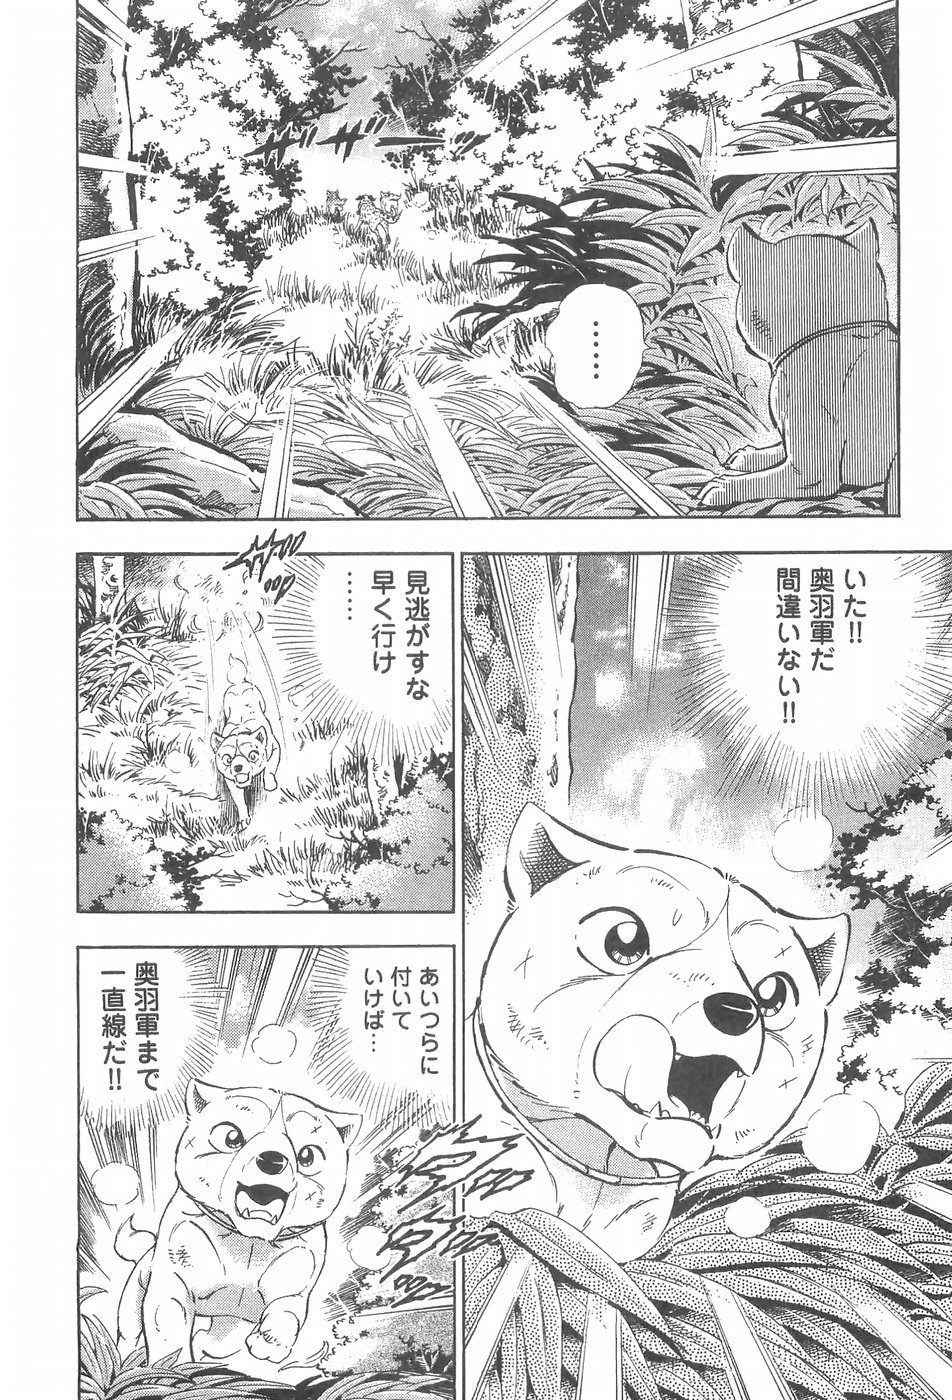 Stuff Of Ginga The First Appearance Of Kotetsu While Hunting And